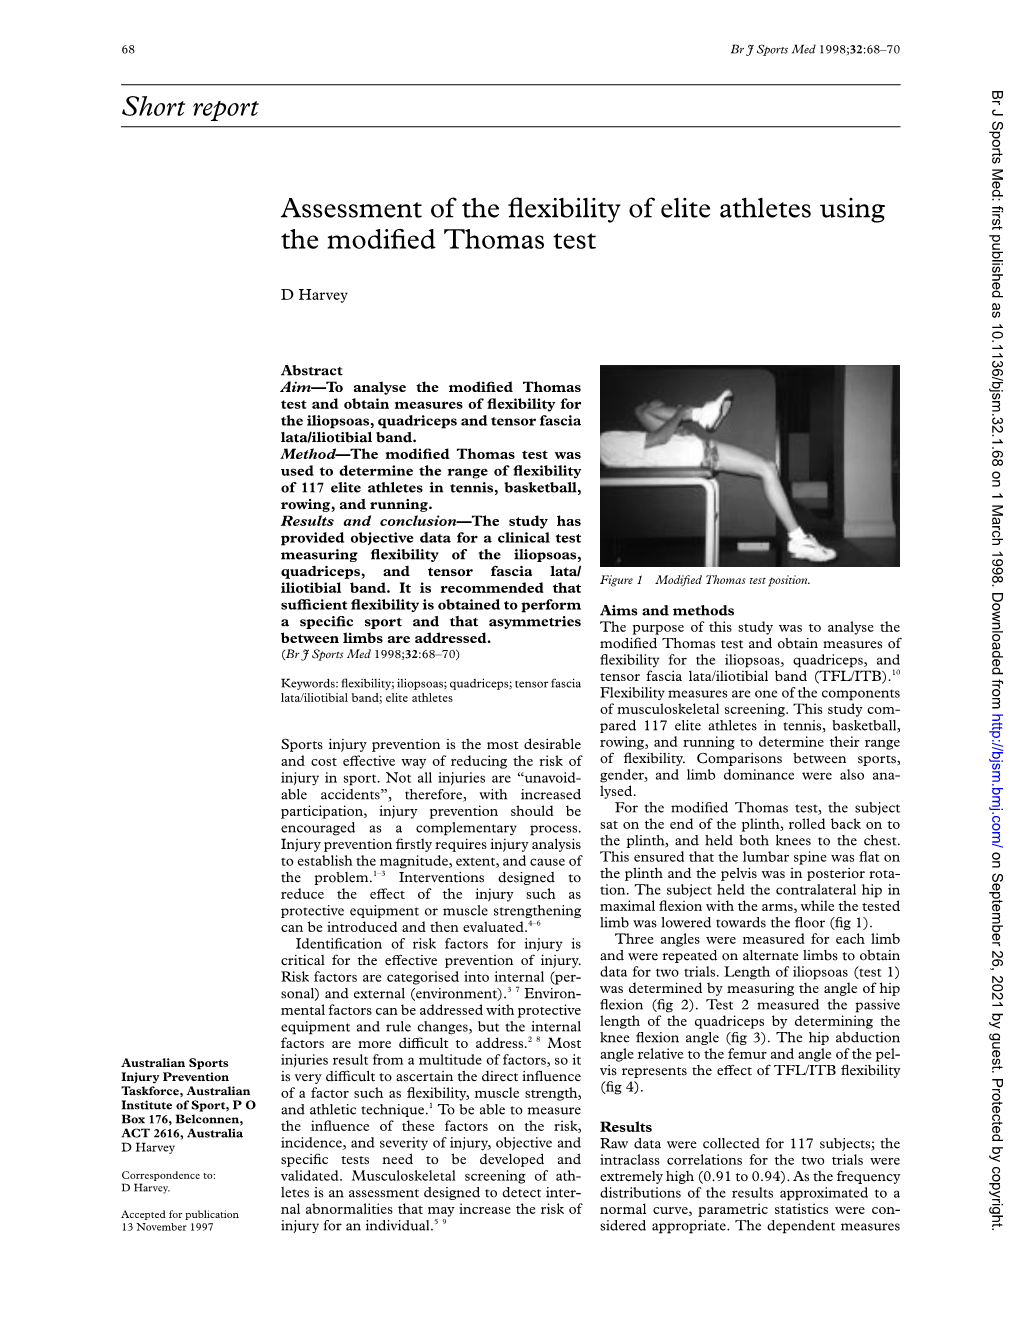 Short Report Assessment of the Flexibility of Elite Athletes Using The